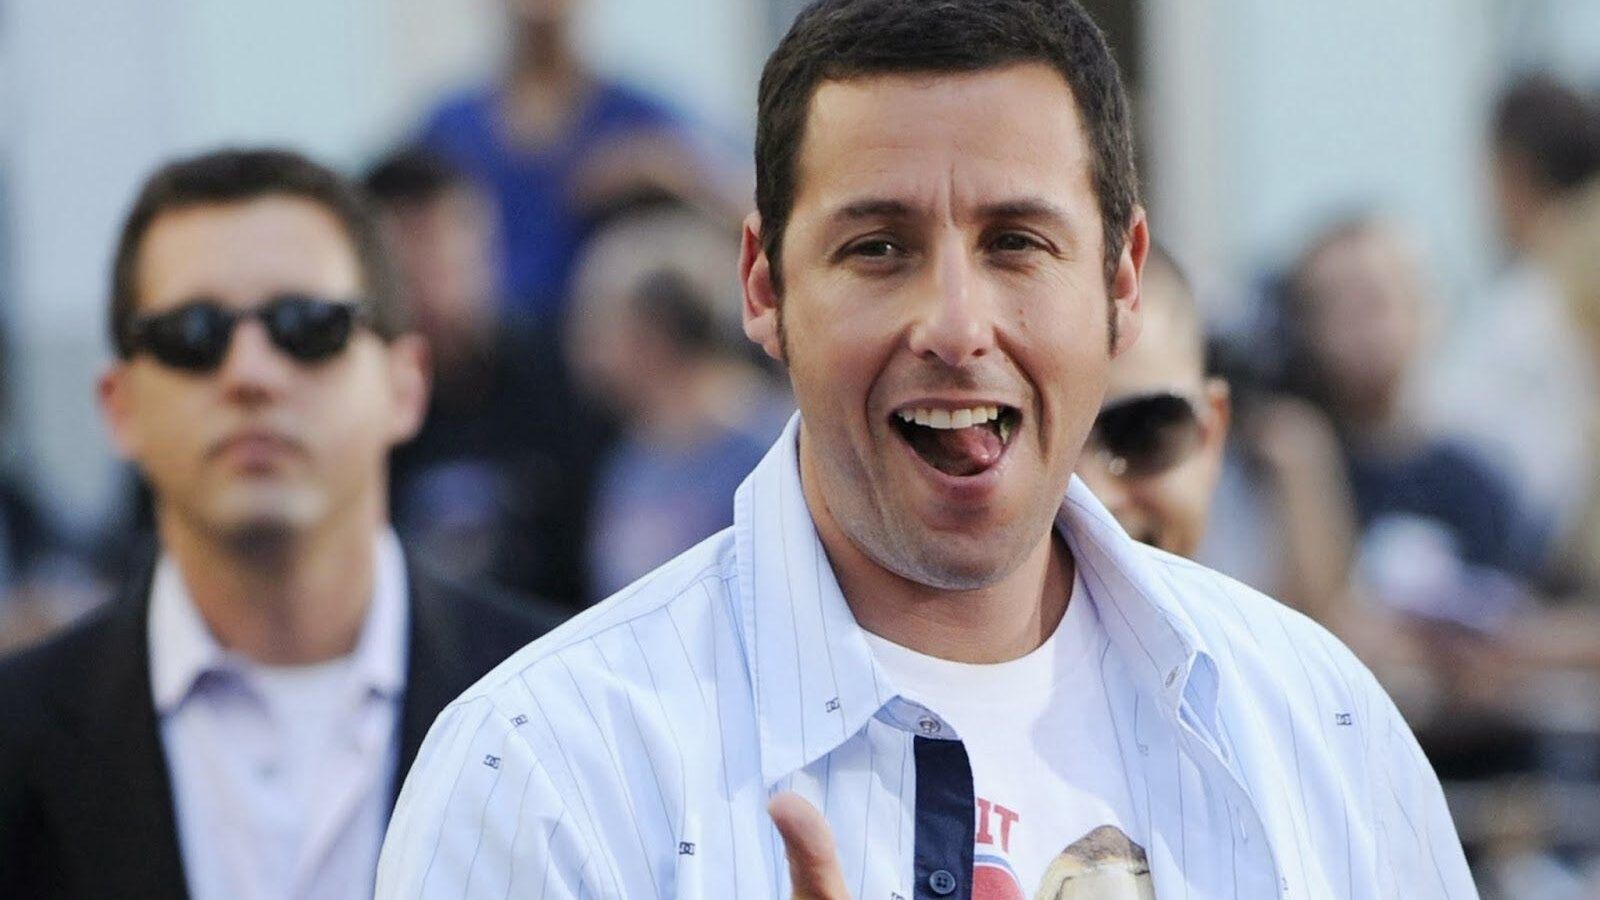 Adam Sandler is one of the richest Hollywood actors.